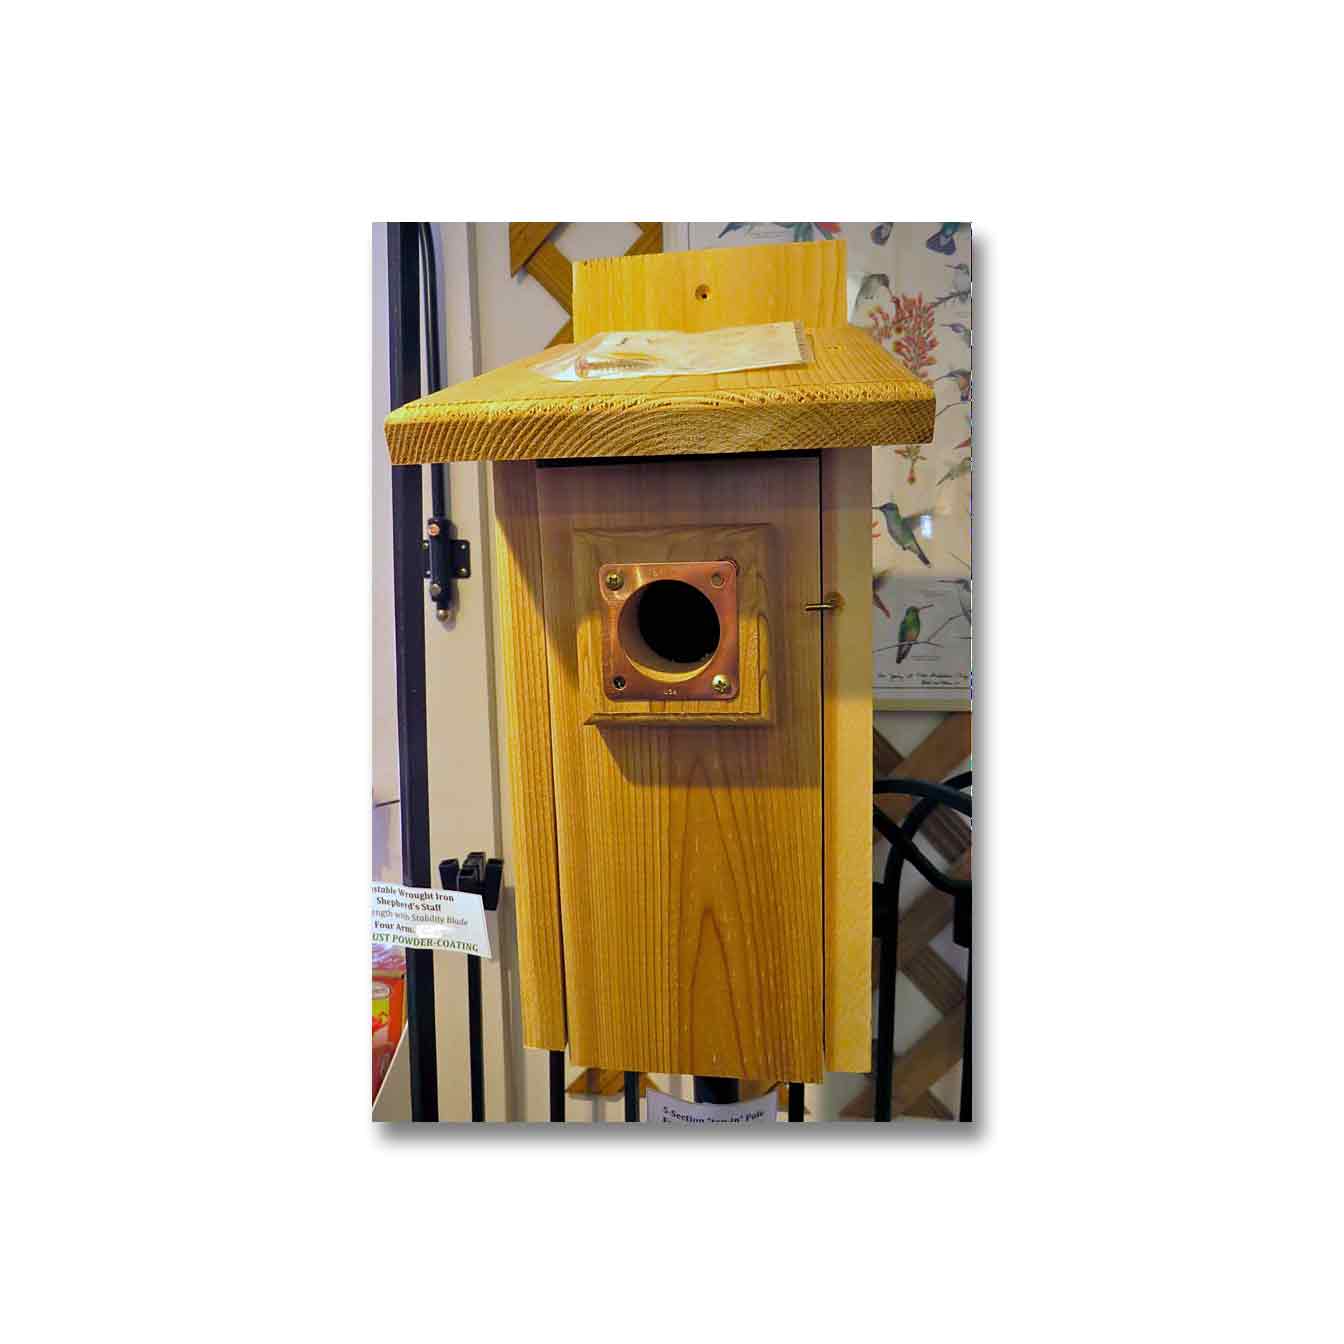 2 BLUEBIRD  BIRD HOUSES NEST BOX WITH TOP OPENING FREE S/H  HANDMADE IN USA 